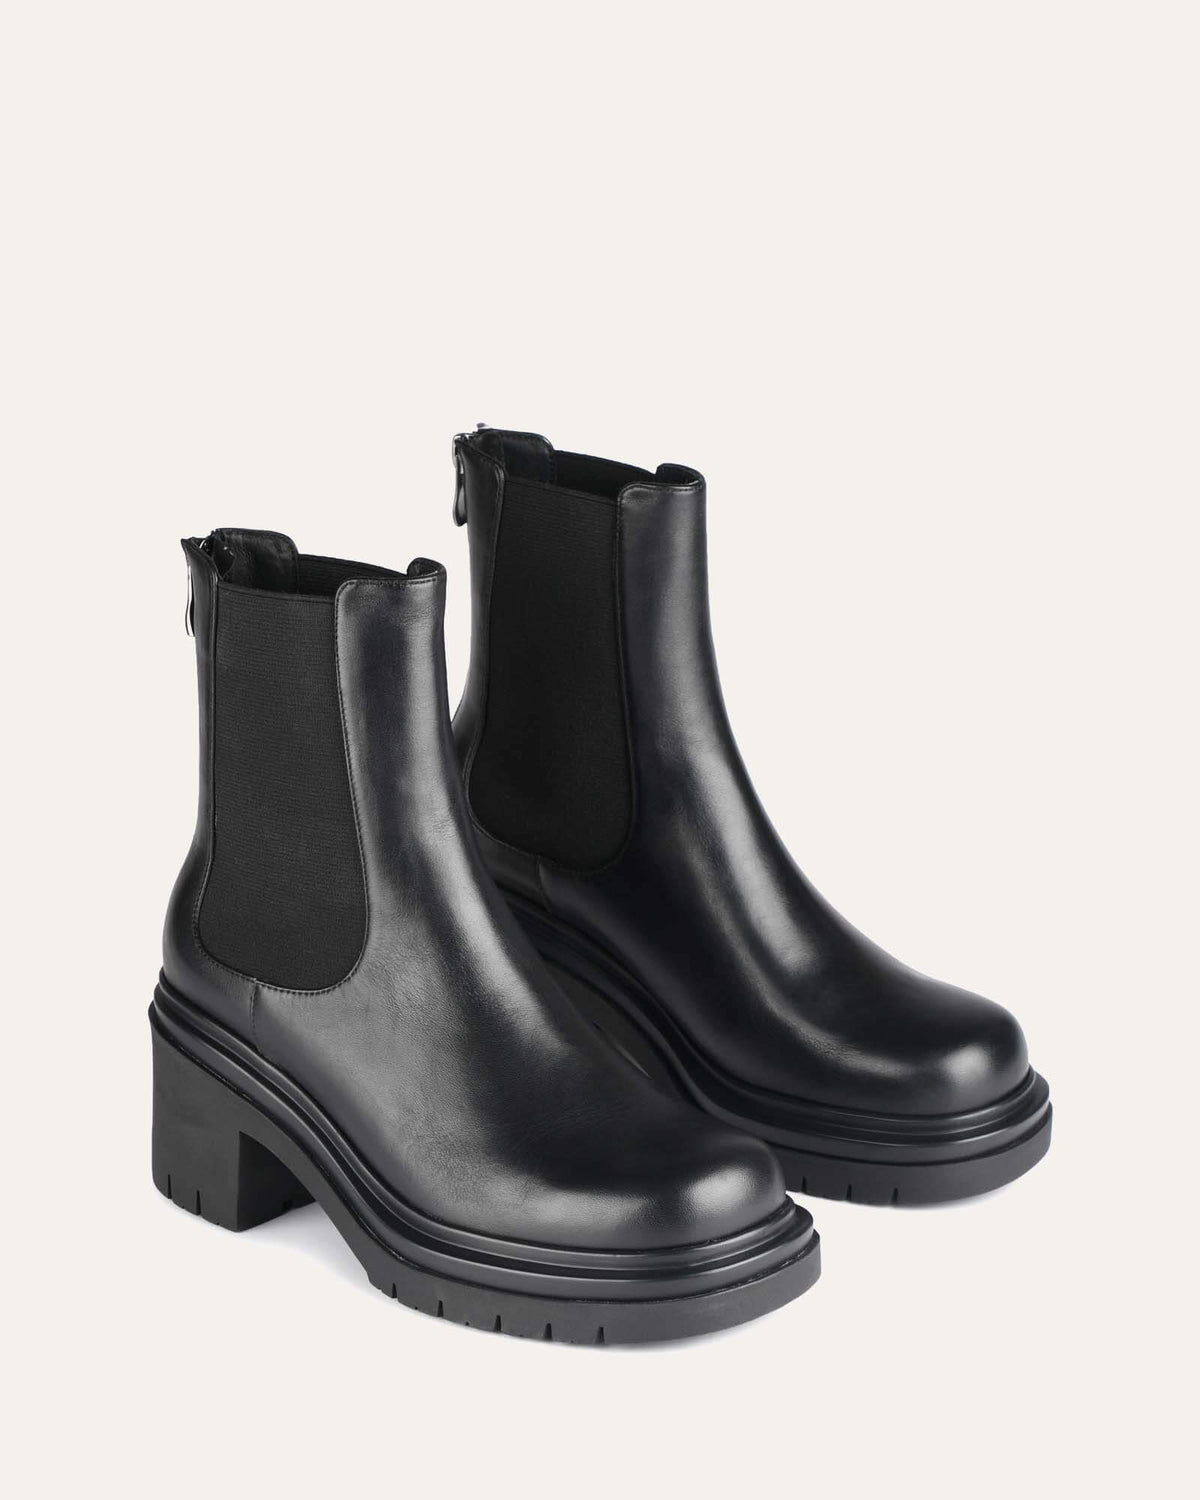 BAILEY MID ANKLE BOOTS BLACK LEATHER